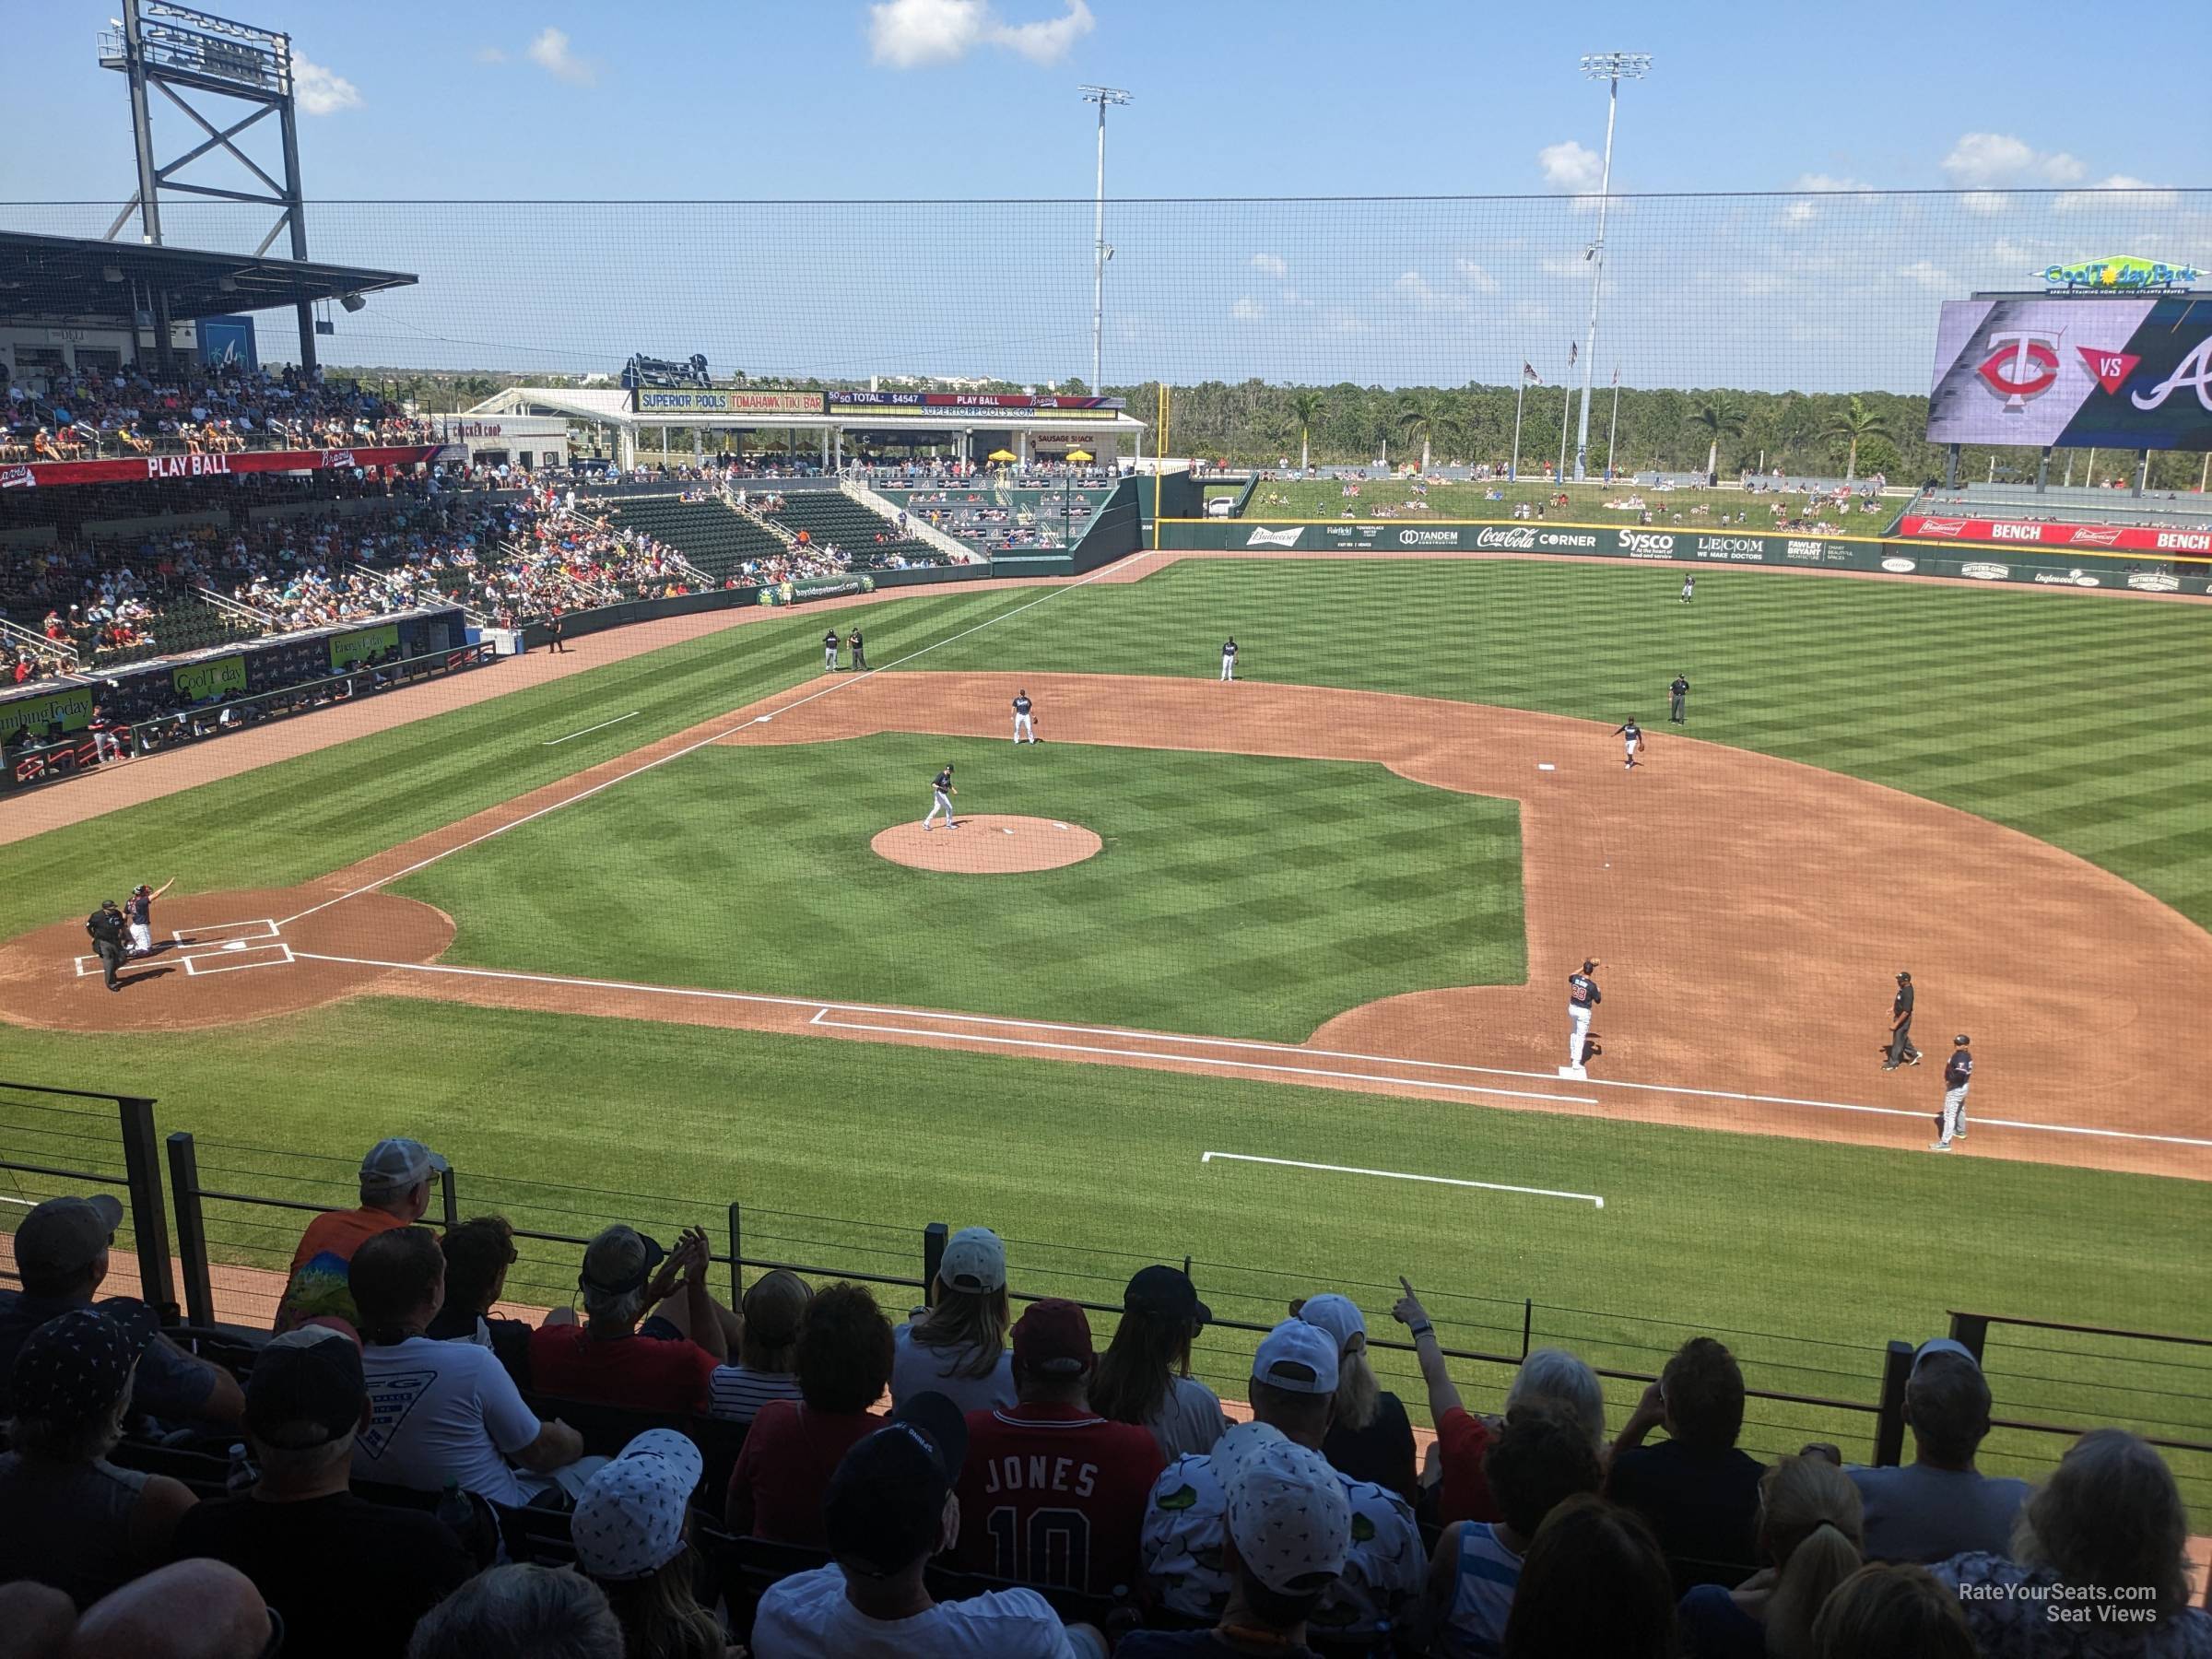 section 203, row 5 seat view  - cooltoday park